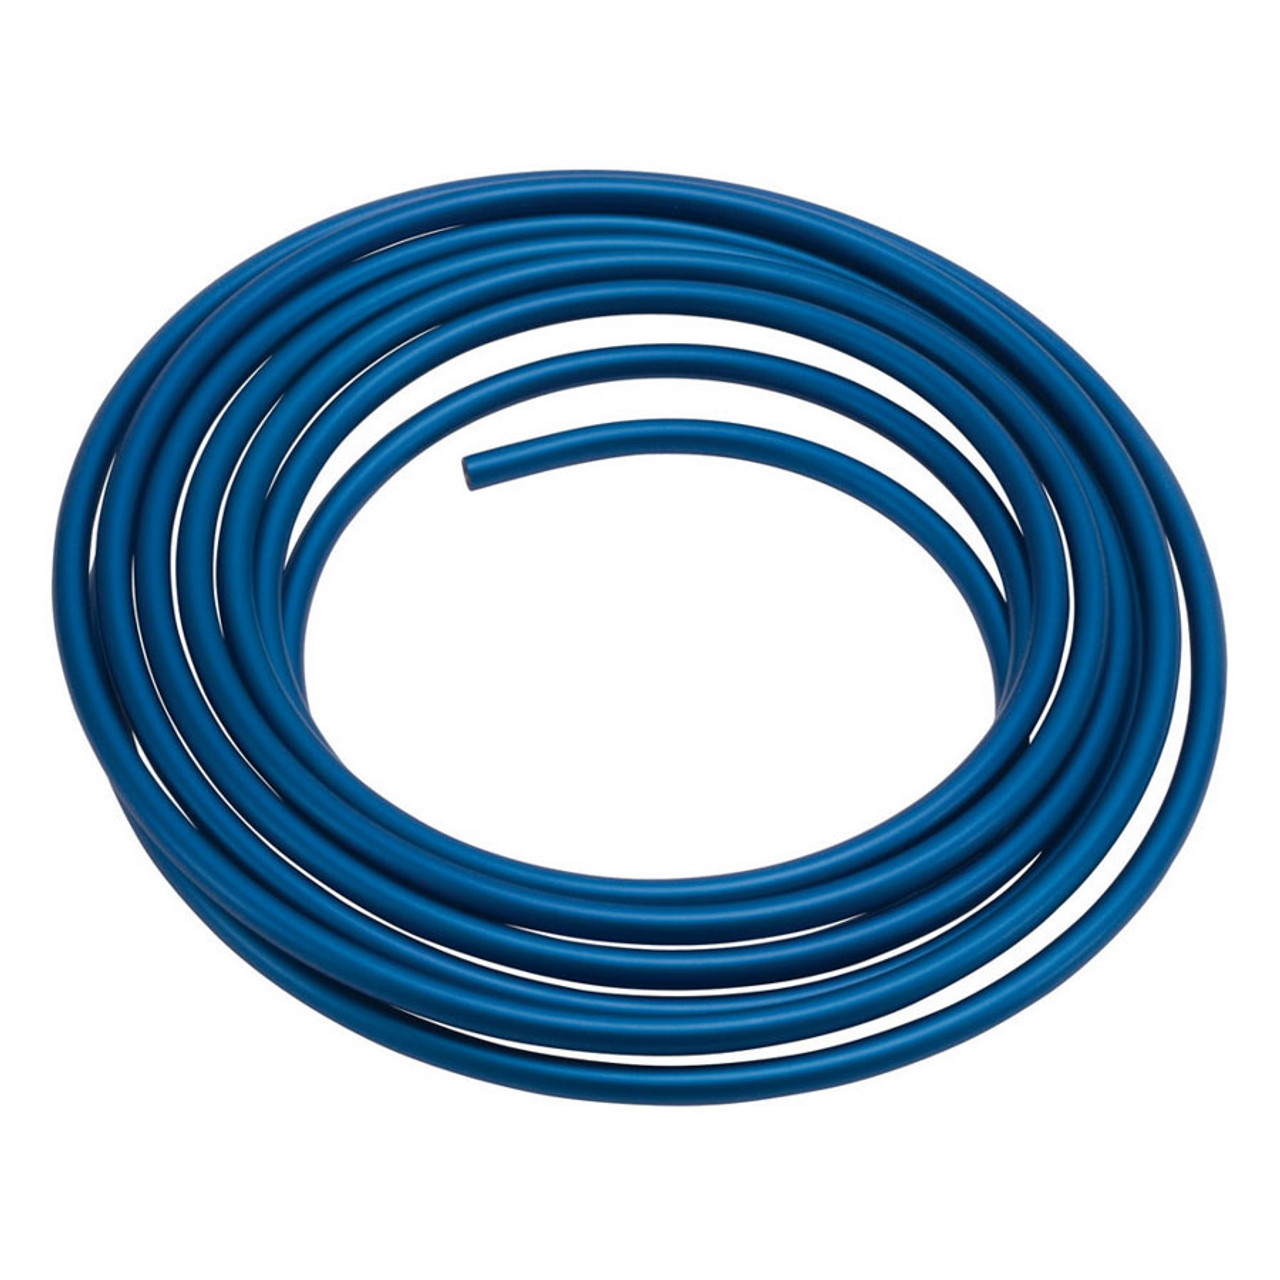 Russell 3/8 Aluminum Fuel Line 25ft - Blue Anodized - RUS639250